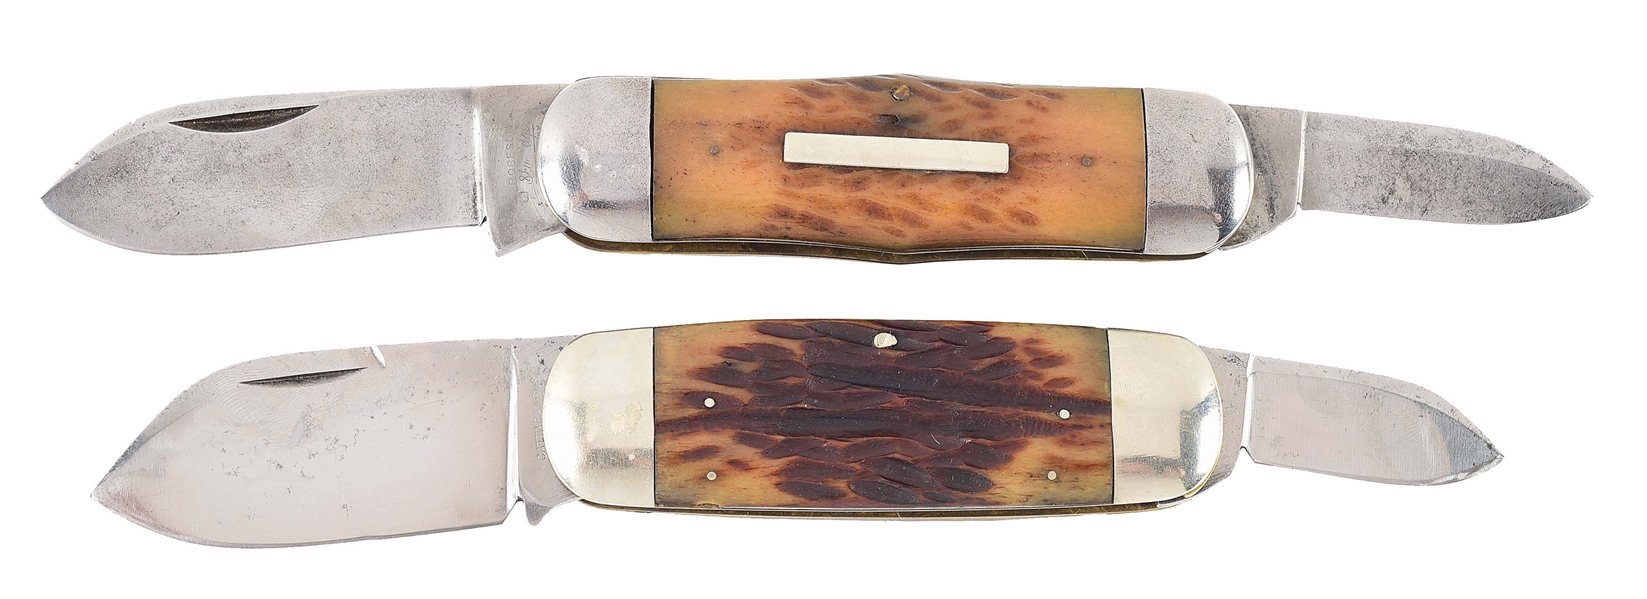 LOT OF 2: AMERICAN EARLY FOLDING "SUNFISH" KNIVES BY CATTARAUGUS & ROBESON.